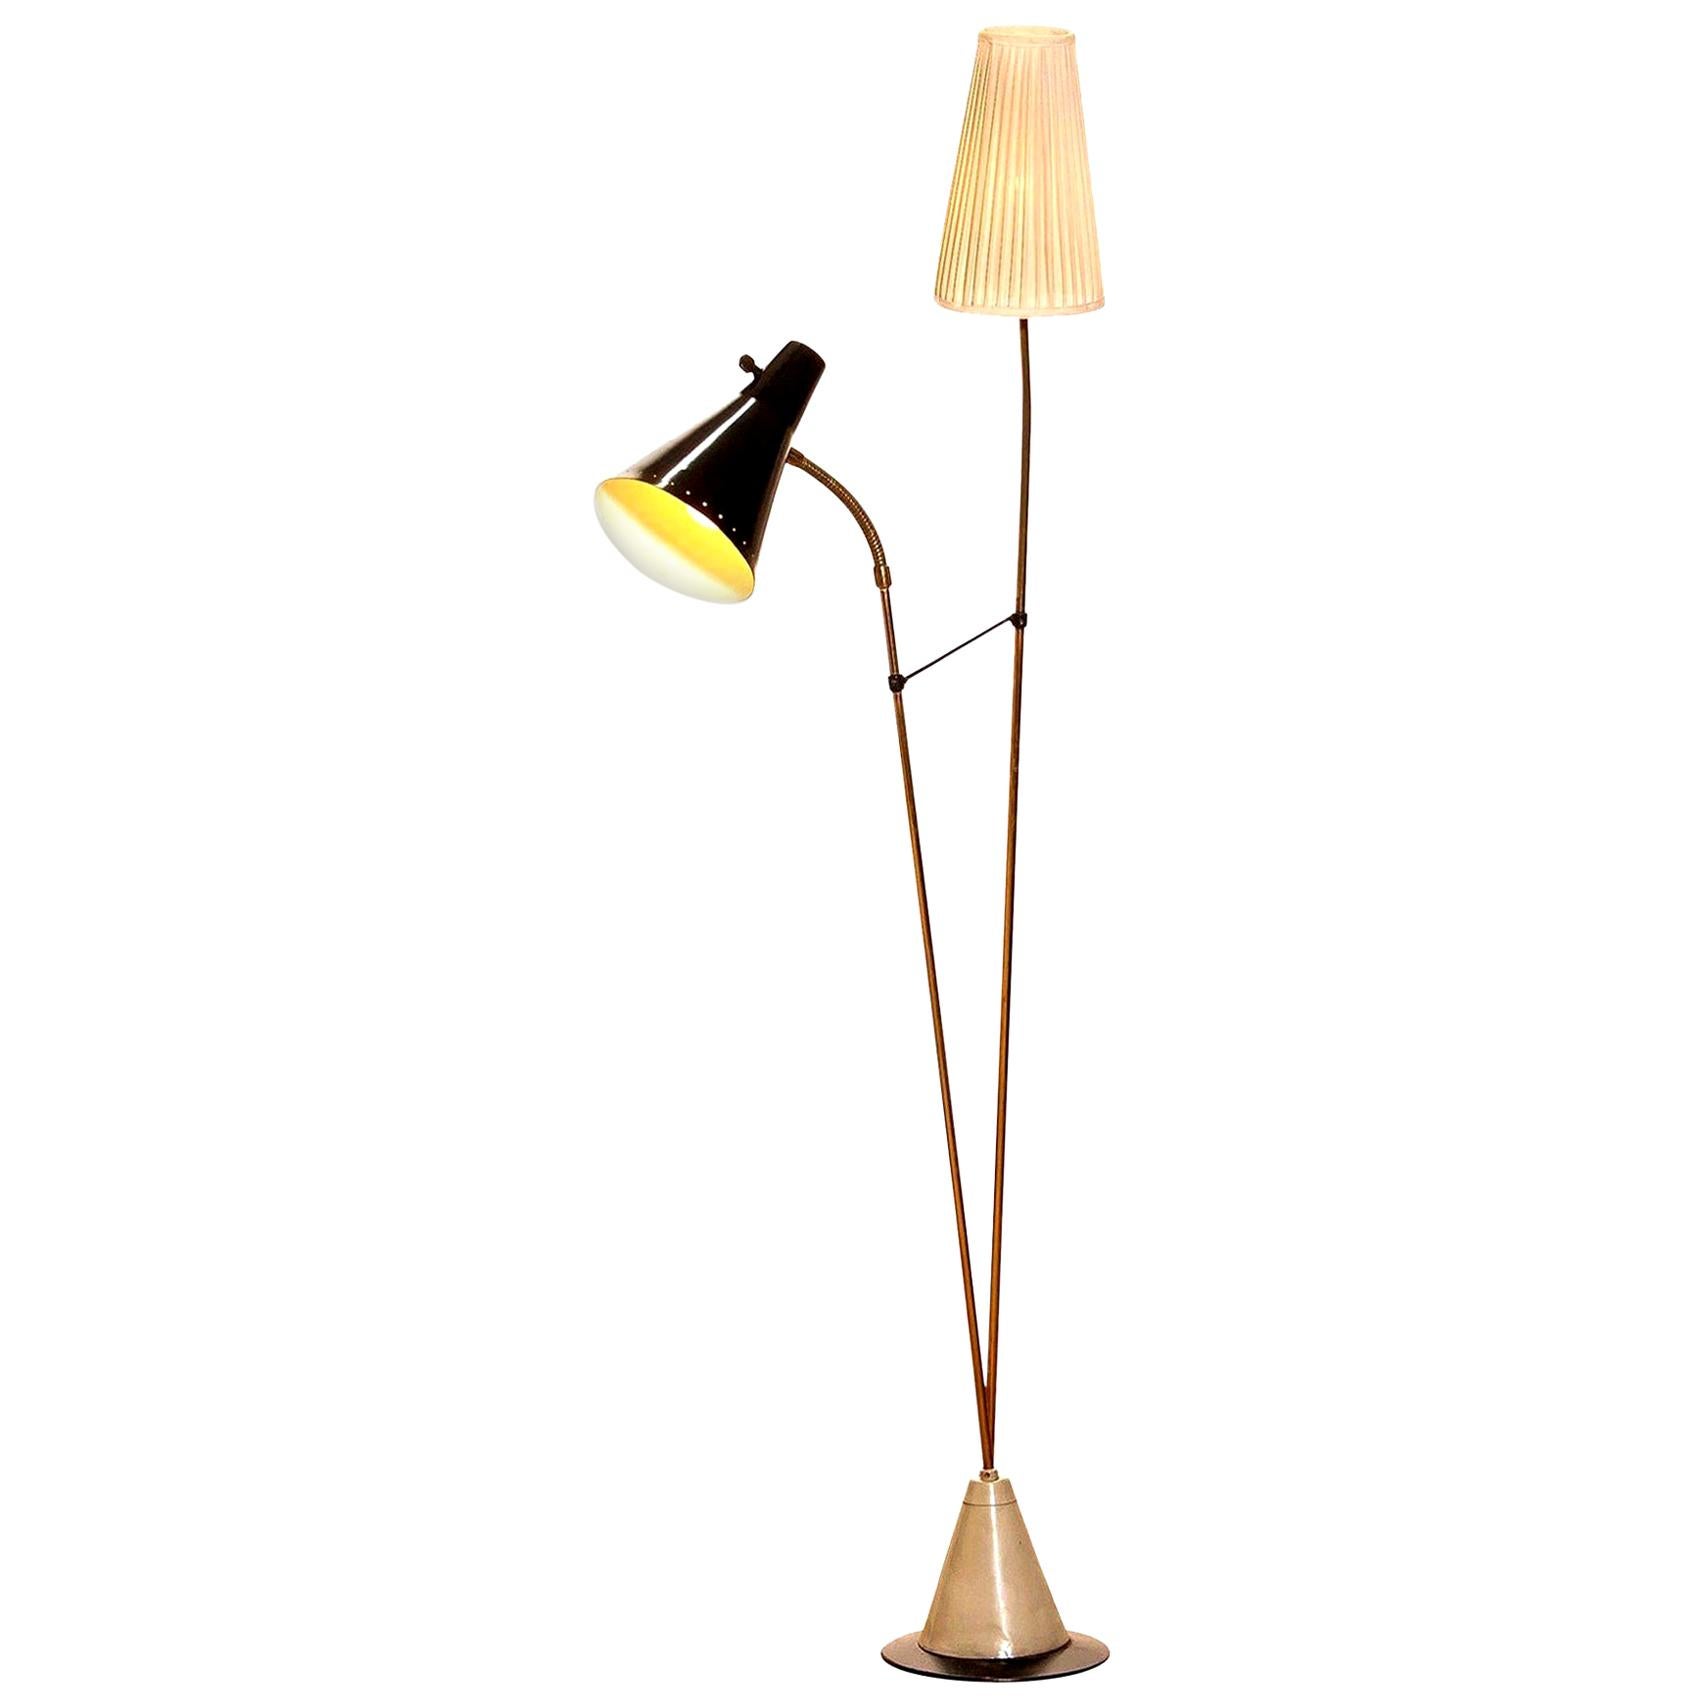 Beautiful floor lamp designed by Hans Bergström for Ateljé Lyktan, Sweden.
This lamp consists of two different shades, one black lacquered metal and one off-white in fabric. The Stand is made of brass with a beautiful iron foot. It is in a very